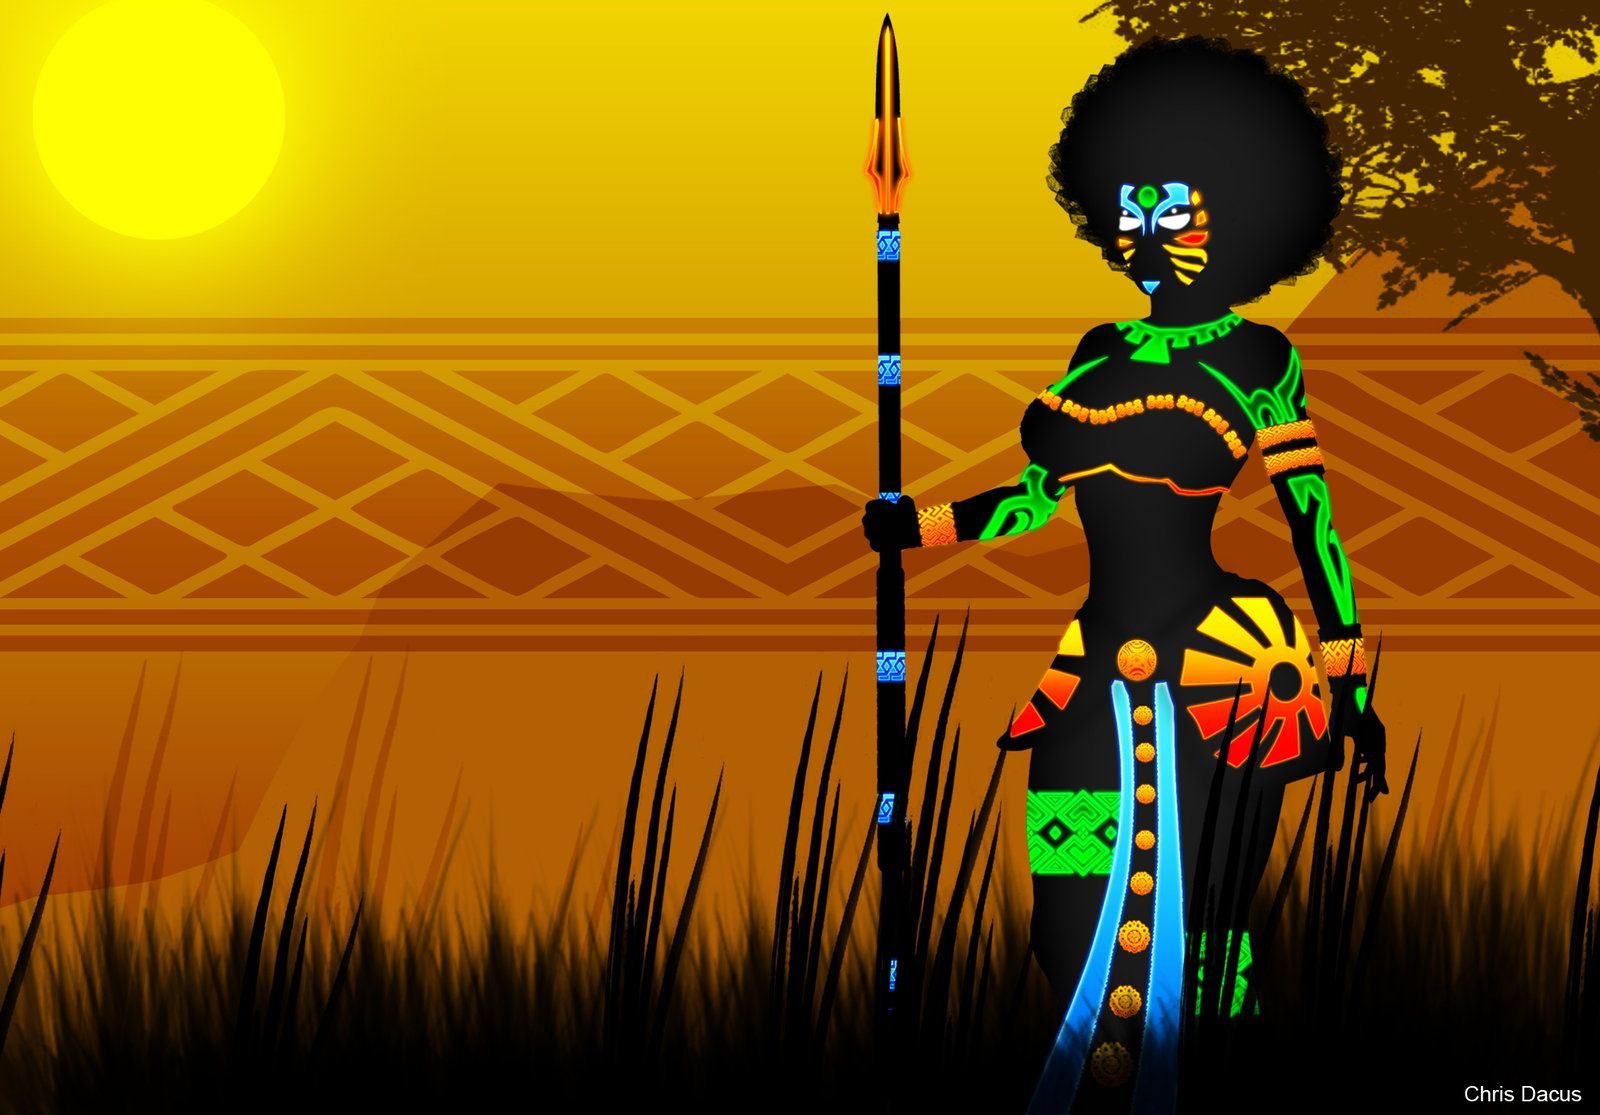 African Wallpapers